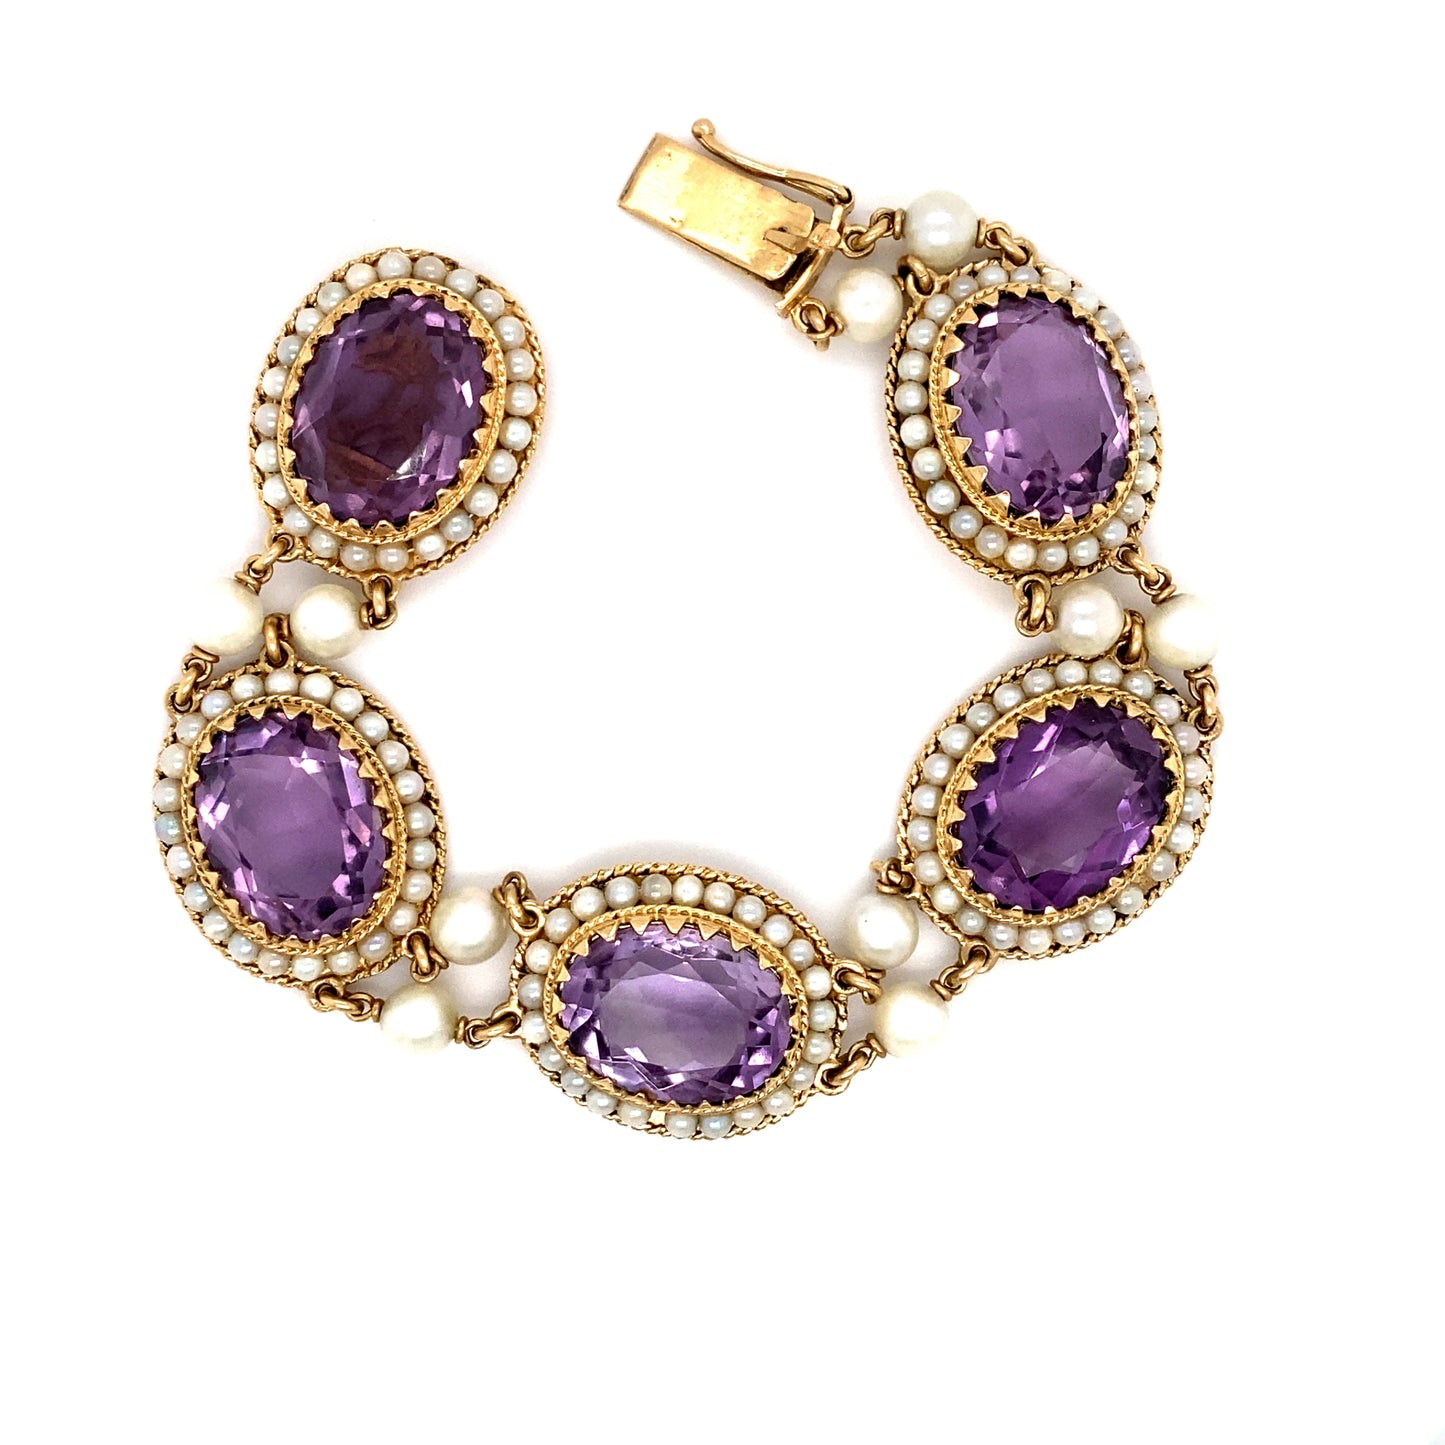 Circa 1950 Retro Amethyst and Pearl Halo Link Bracelet in 14K Gold